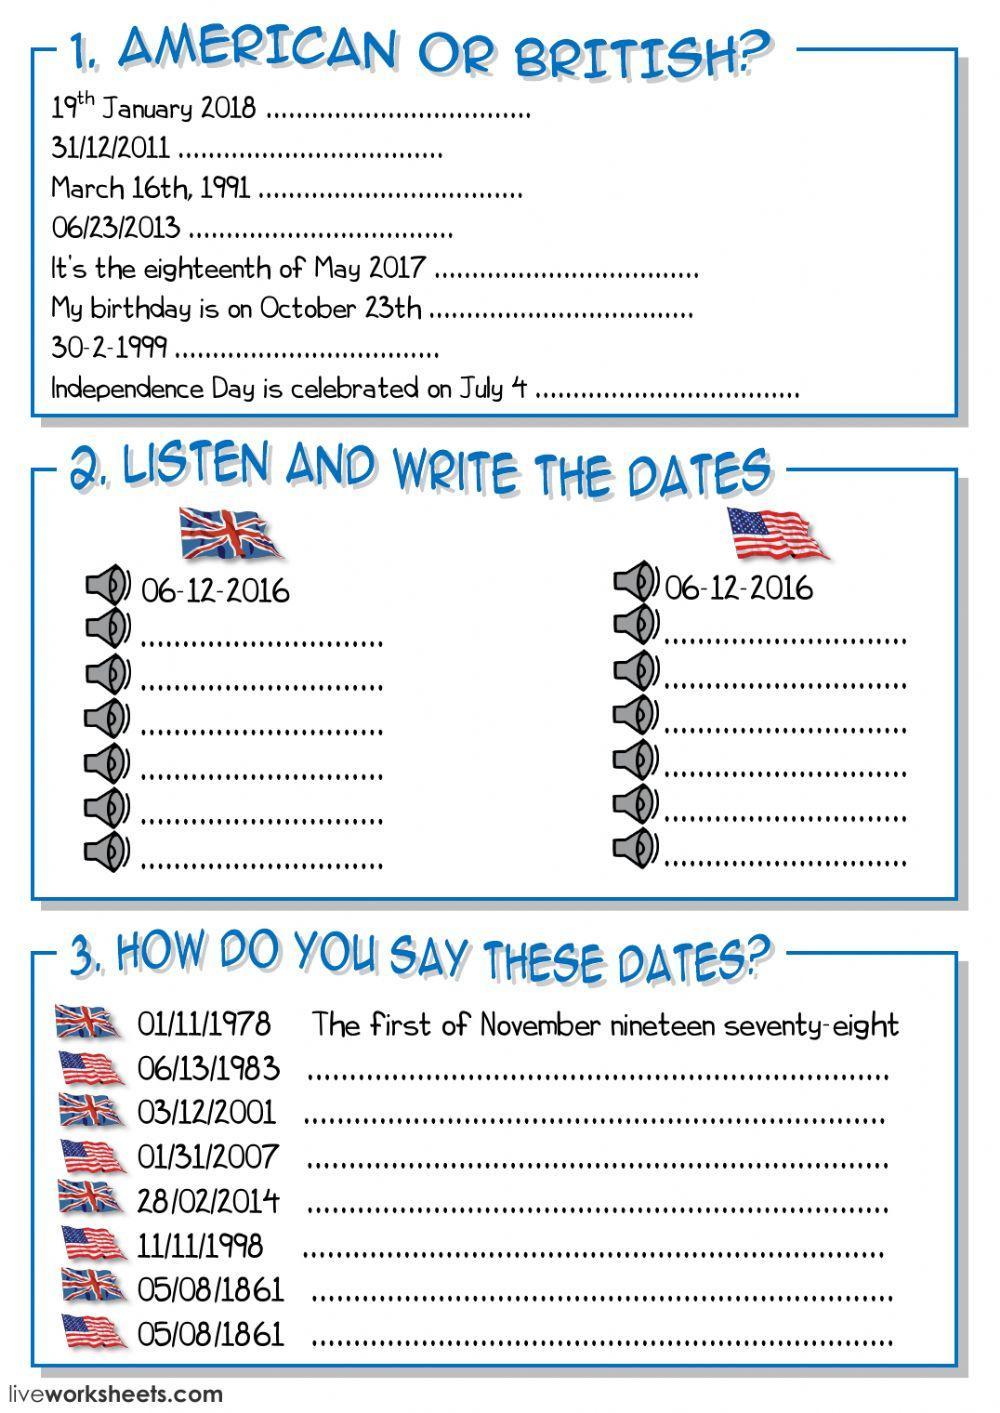 How to write and say dates in English